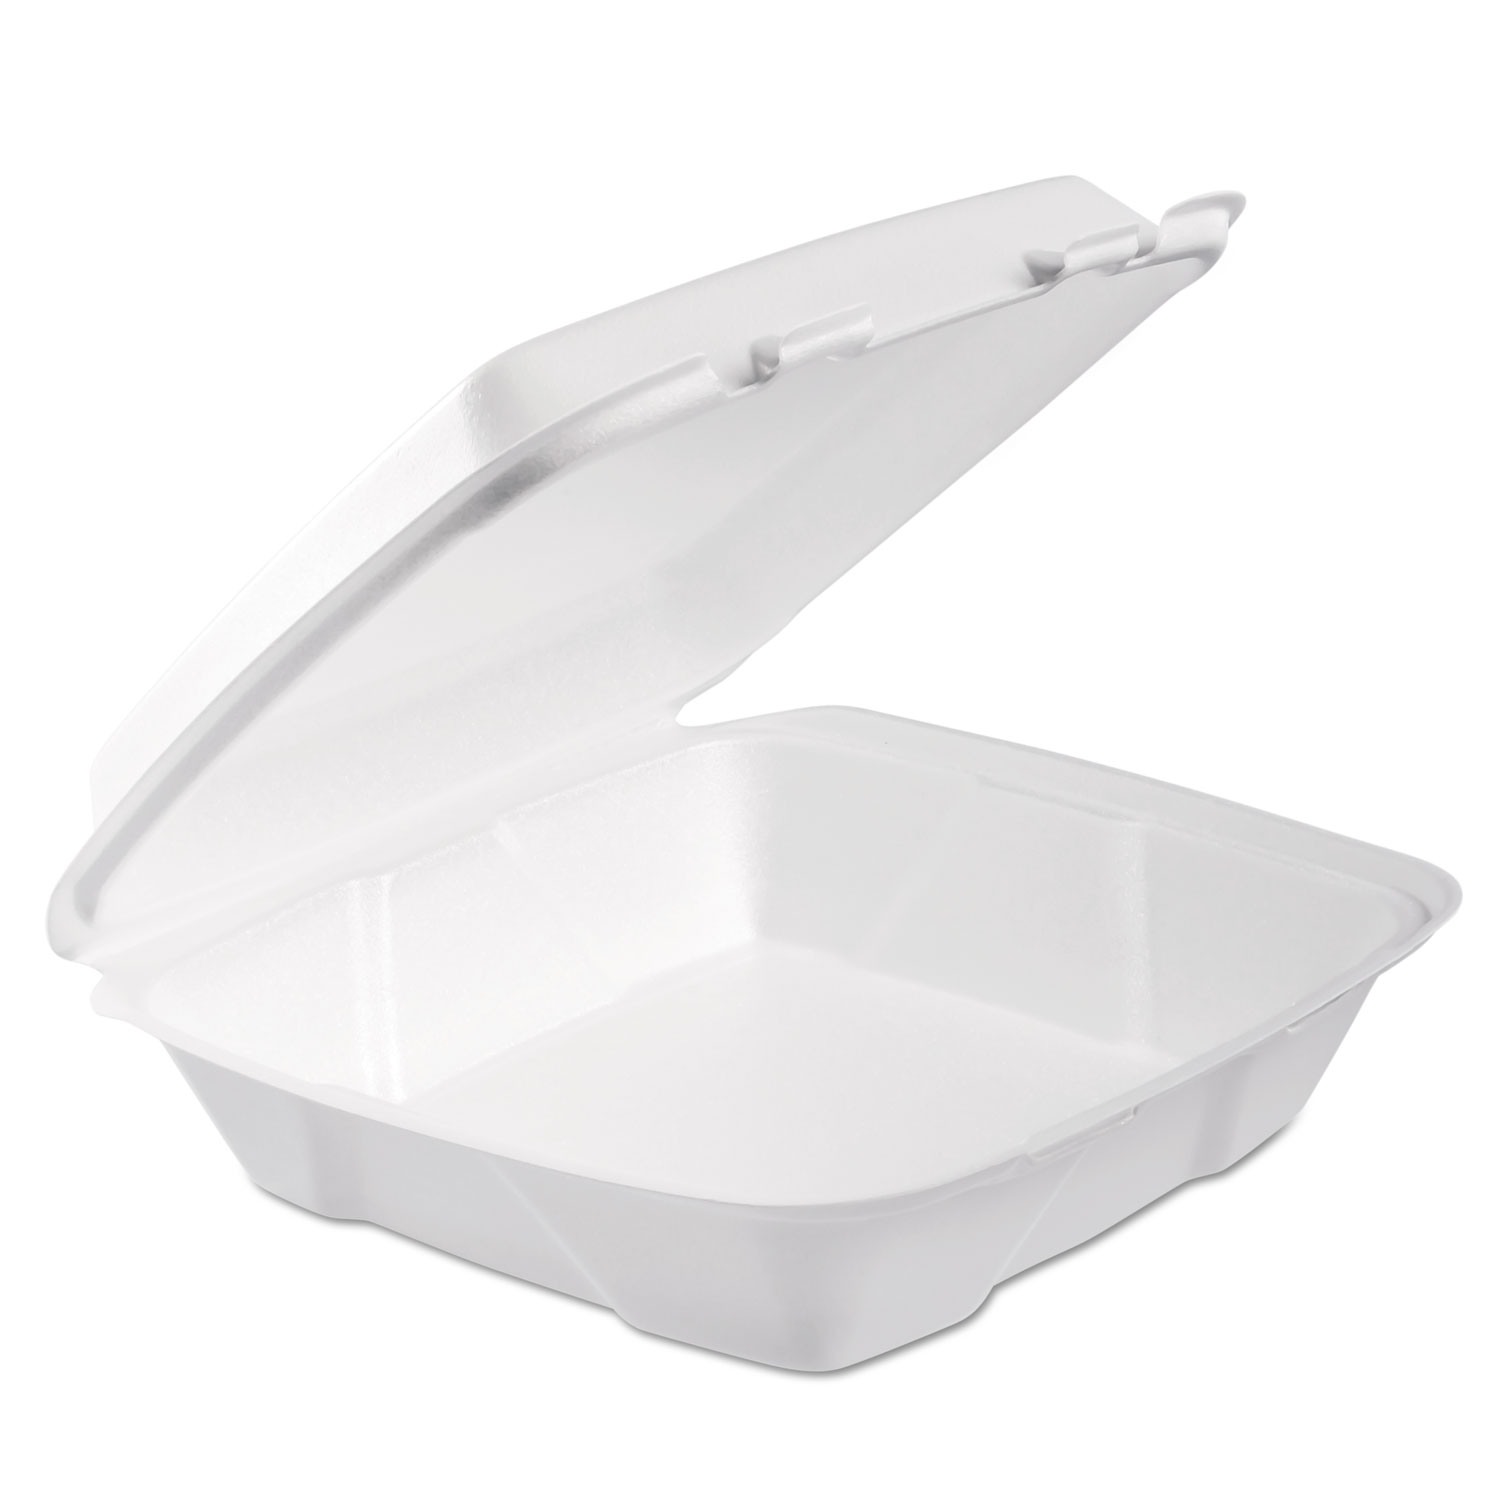 Foam Hinged Lid Container, 1-Comp, 9 x 9 2/5 x 3, White, 100/Bag, 2 Bag/Carton